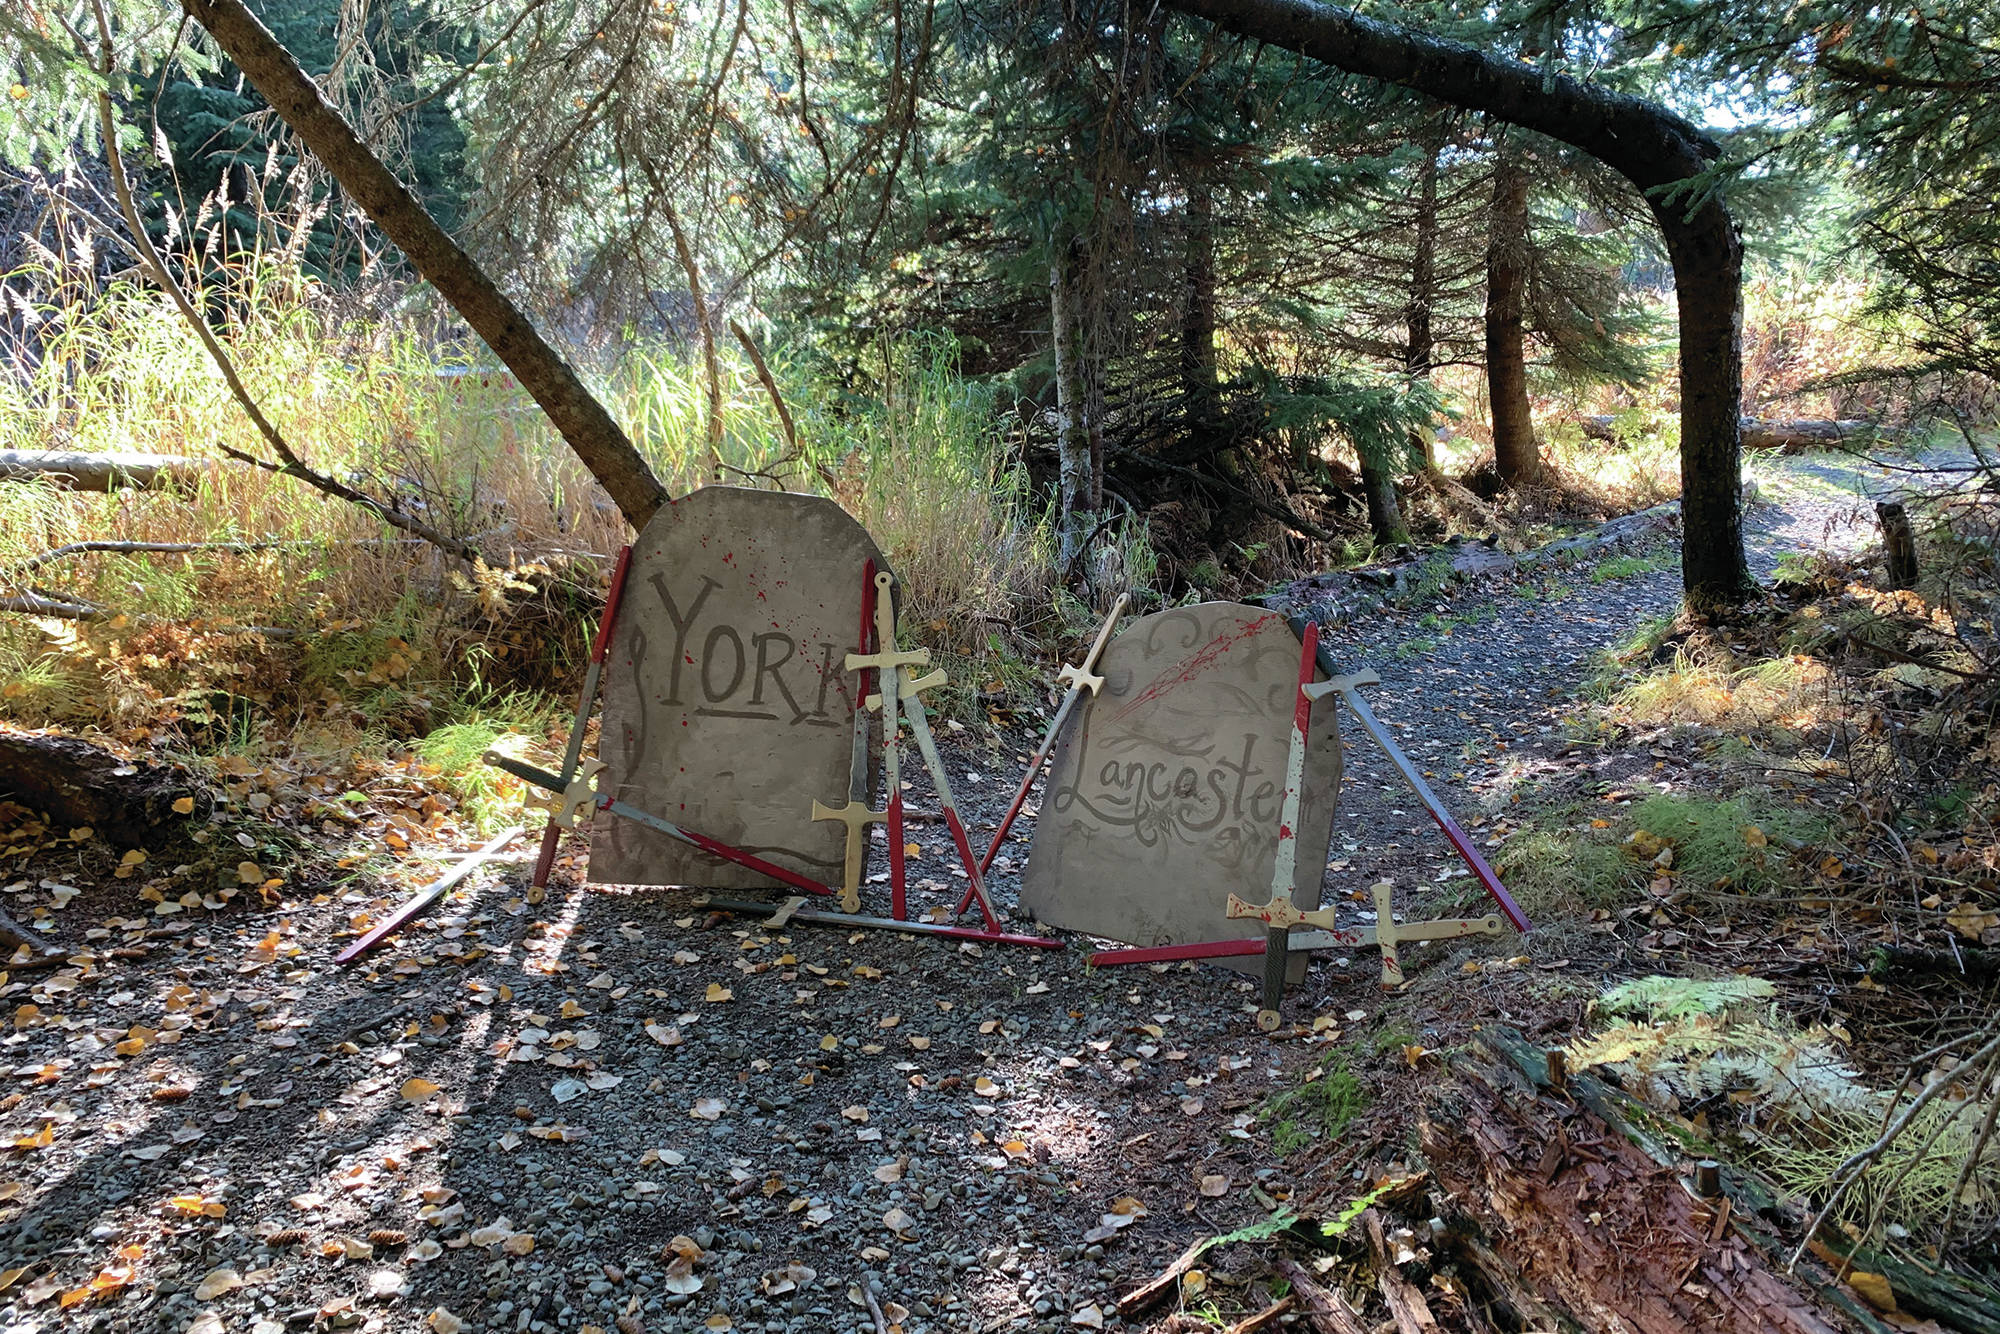 Some props from "Haunted Shakespeare" in a photo taken Oct. 12, 2020, at the Pratt Museum forest trail in Homer, Alaska. (Photo courtesy Pier One Theatre)